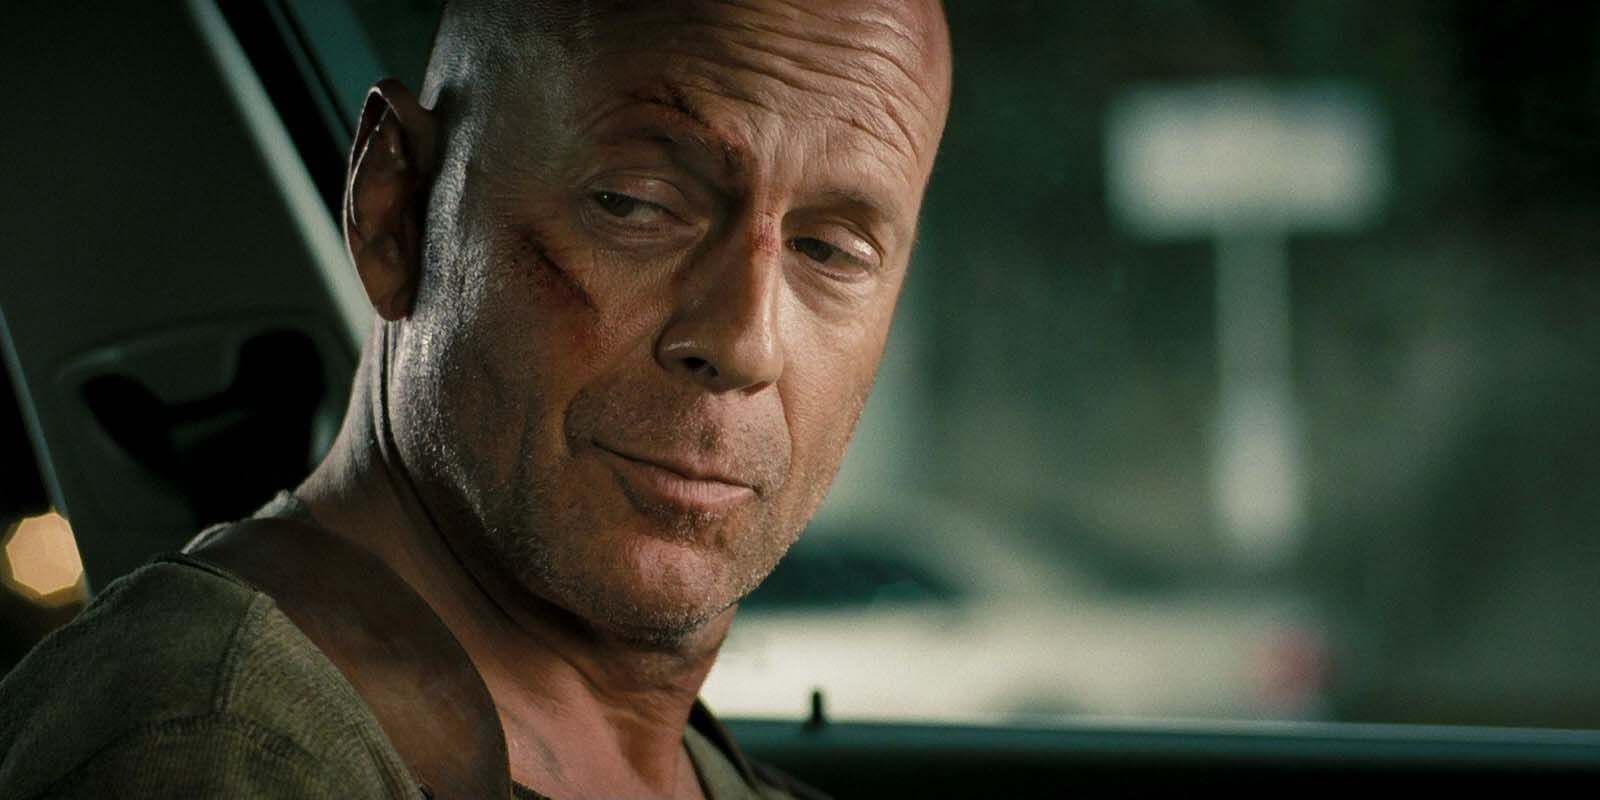 Live Free Or Die Hard 5 Things It Got Right (& 5 It Got Wrong)